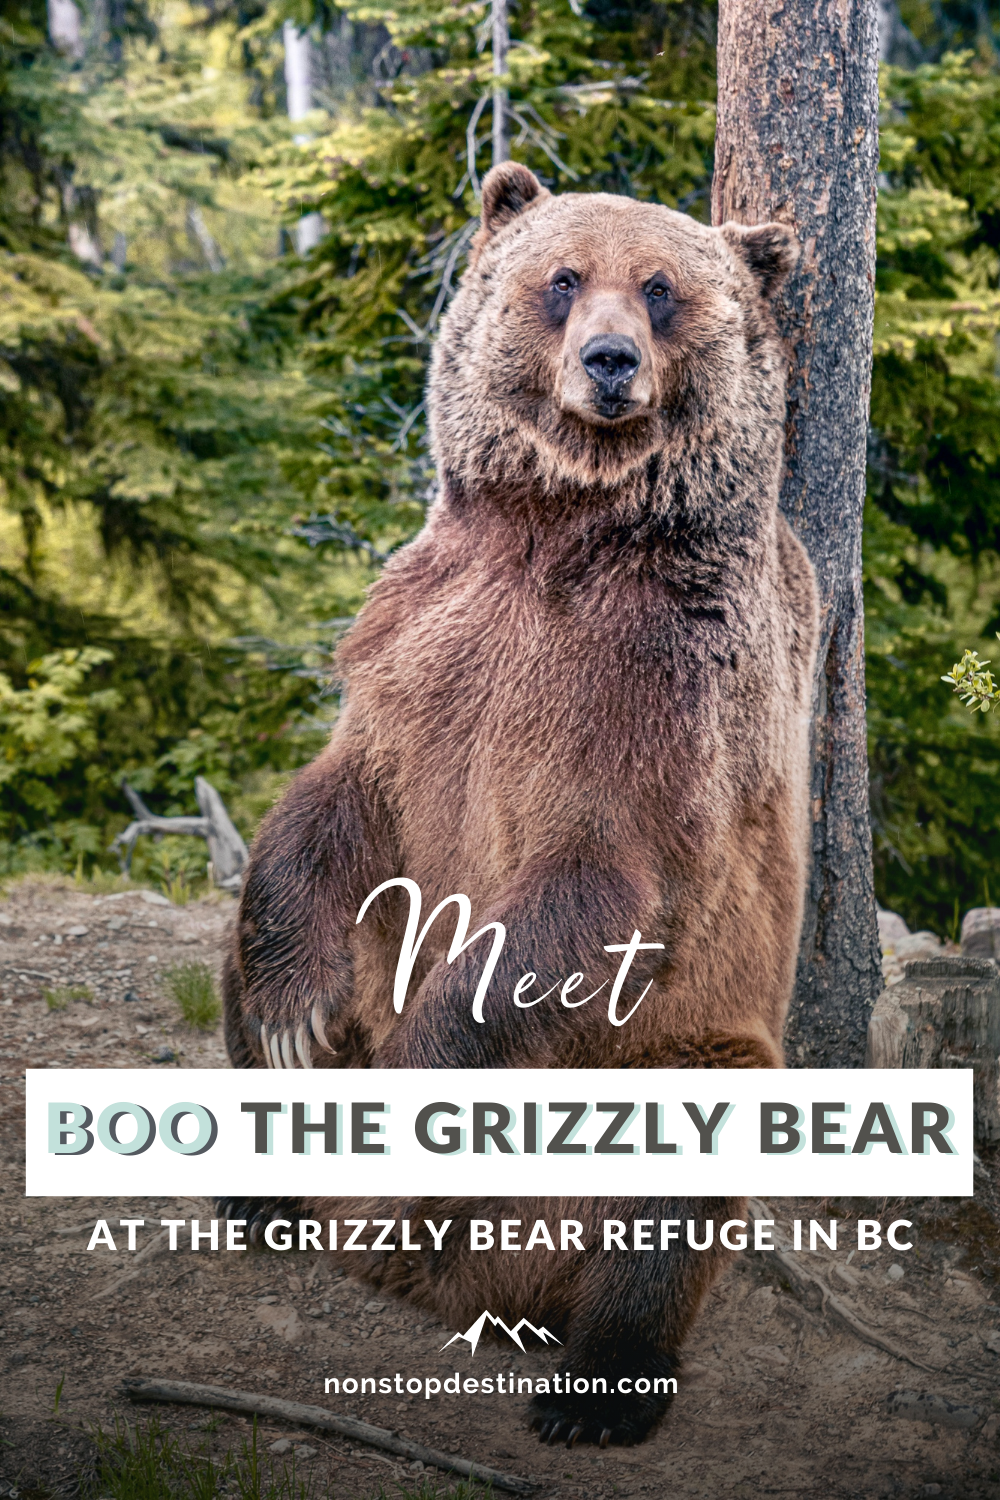 Pin Boo the bear grizzly refuge kicking horse